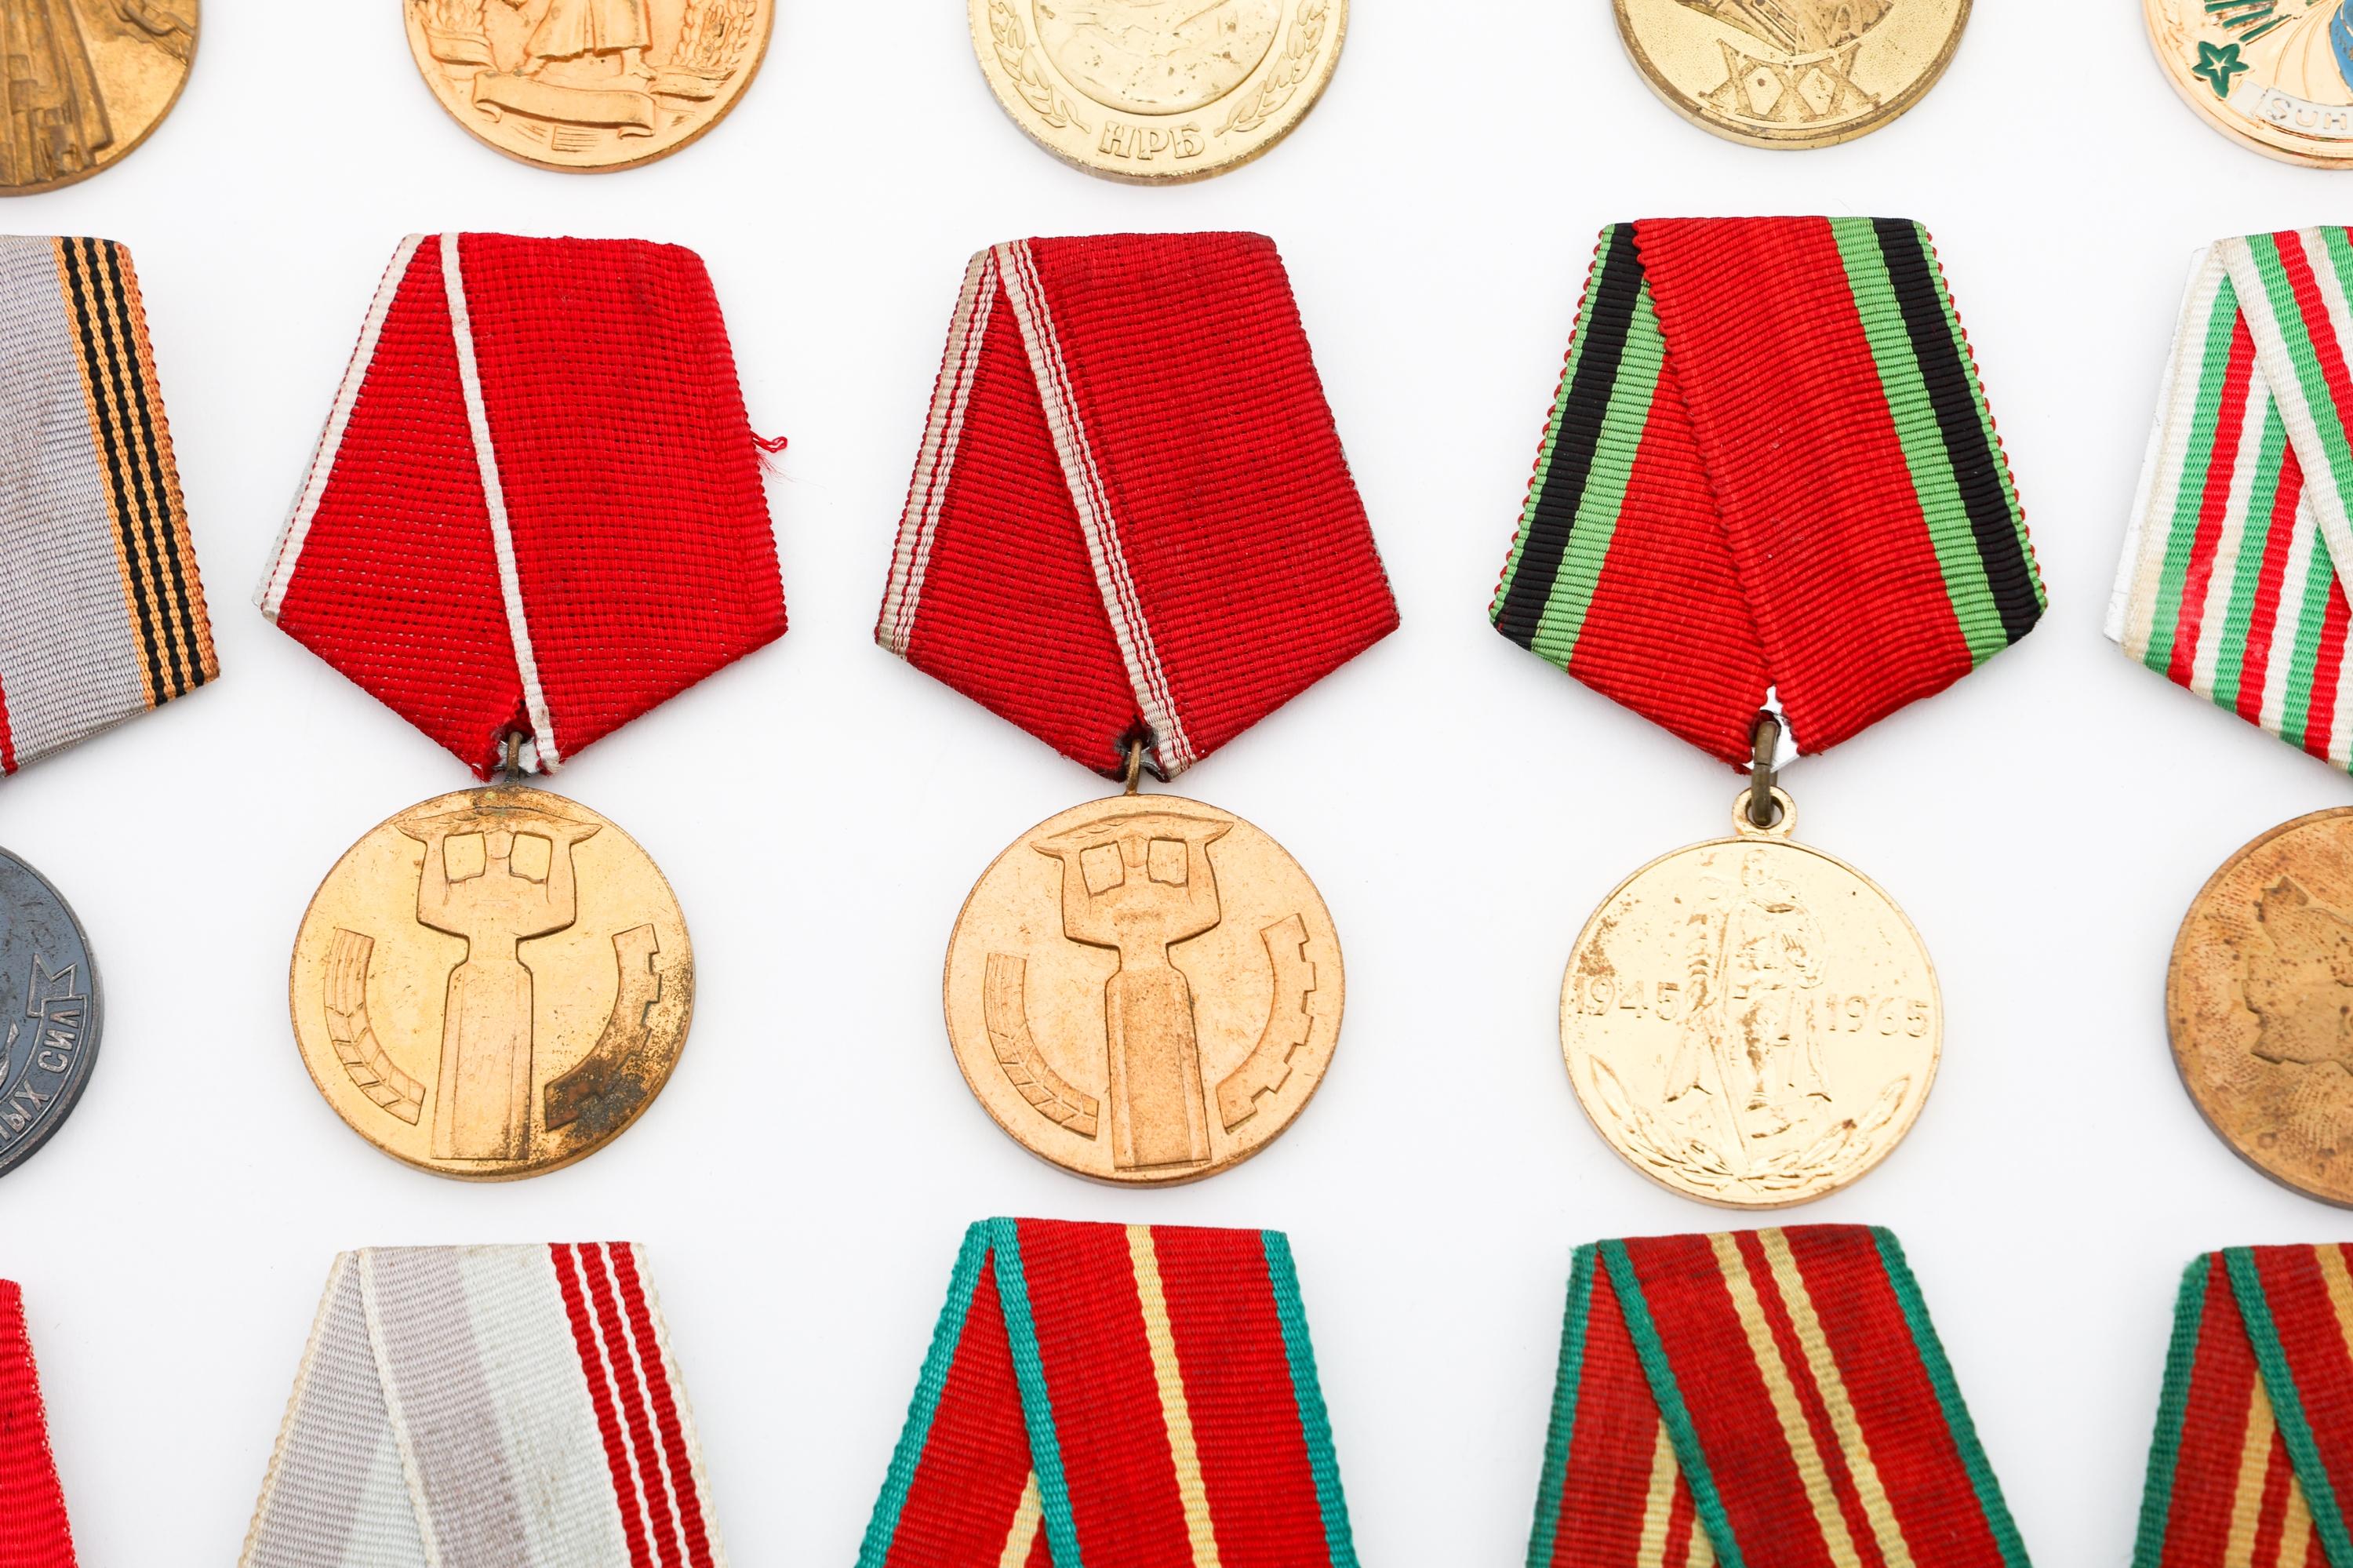 WWII - COLD WAR USSR SERVICE & JUBILEE MEDALS